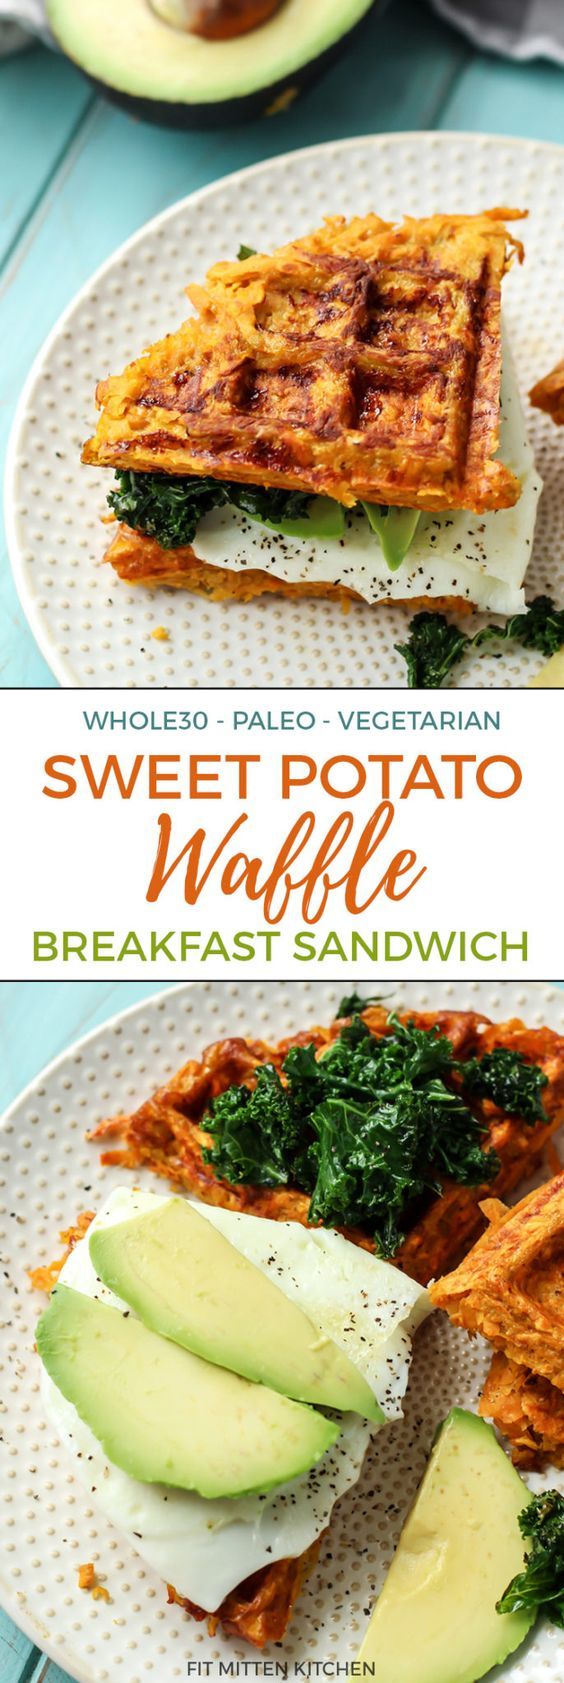 Discover tasty low carb breakfast options in this health article. | low carb breakfast food list | low carb breakfast without eggs | breakfast menus and recipes | healthy breakfast ideas #nobake #healthymeals #healthyeating #keepingfit #healthyliving #healthy #nutrition #natural